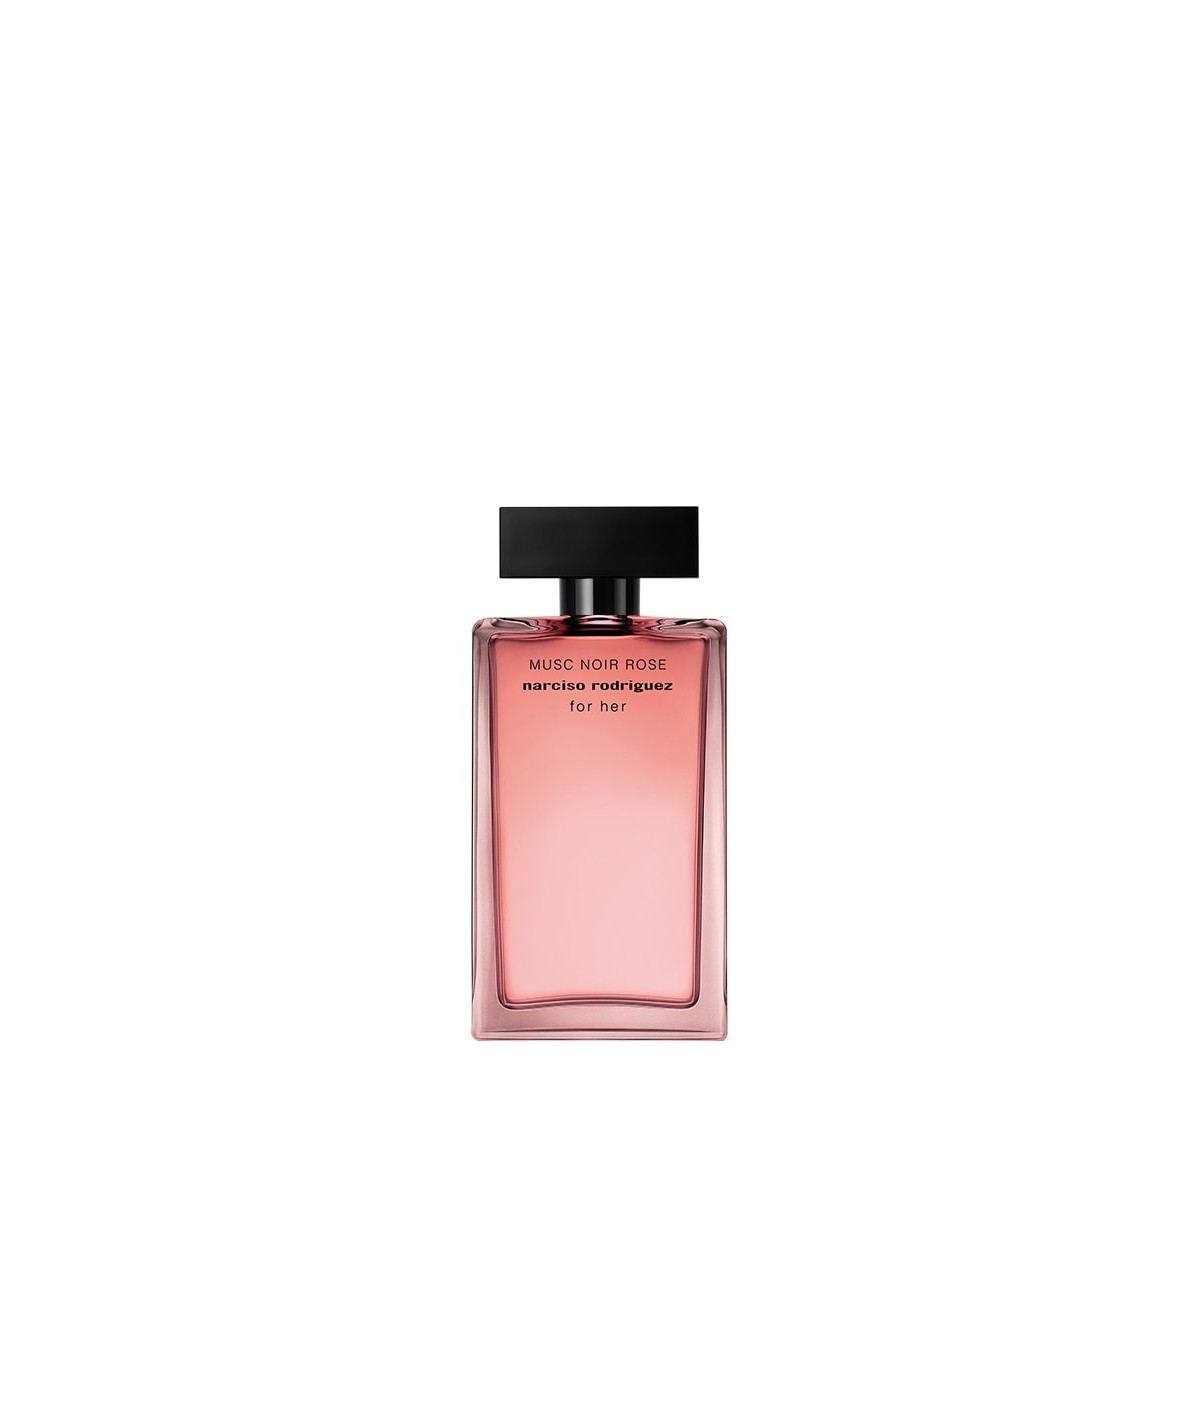 Narciso rodriguez musc noir rose for her. Narciso Rodriguez Musc Noir Rose for her EDP 100 ml. Narciso Rodriguez Rose Musk. Духи Роуз Ноире. Нарциссо Родригес Нуар Роуз Маск отзывы.